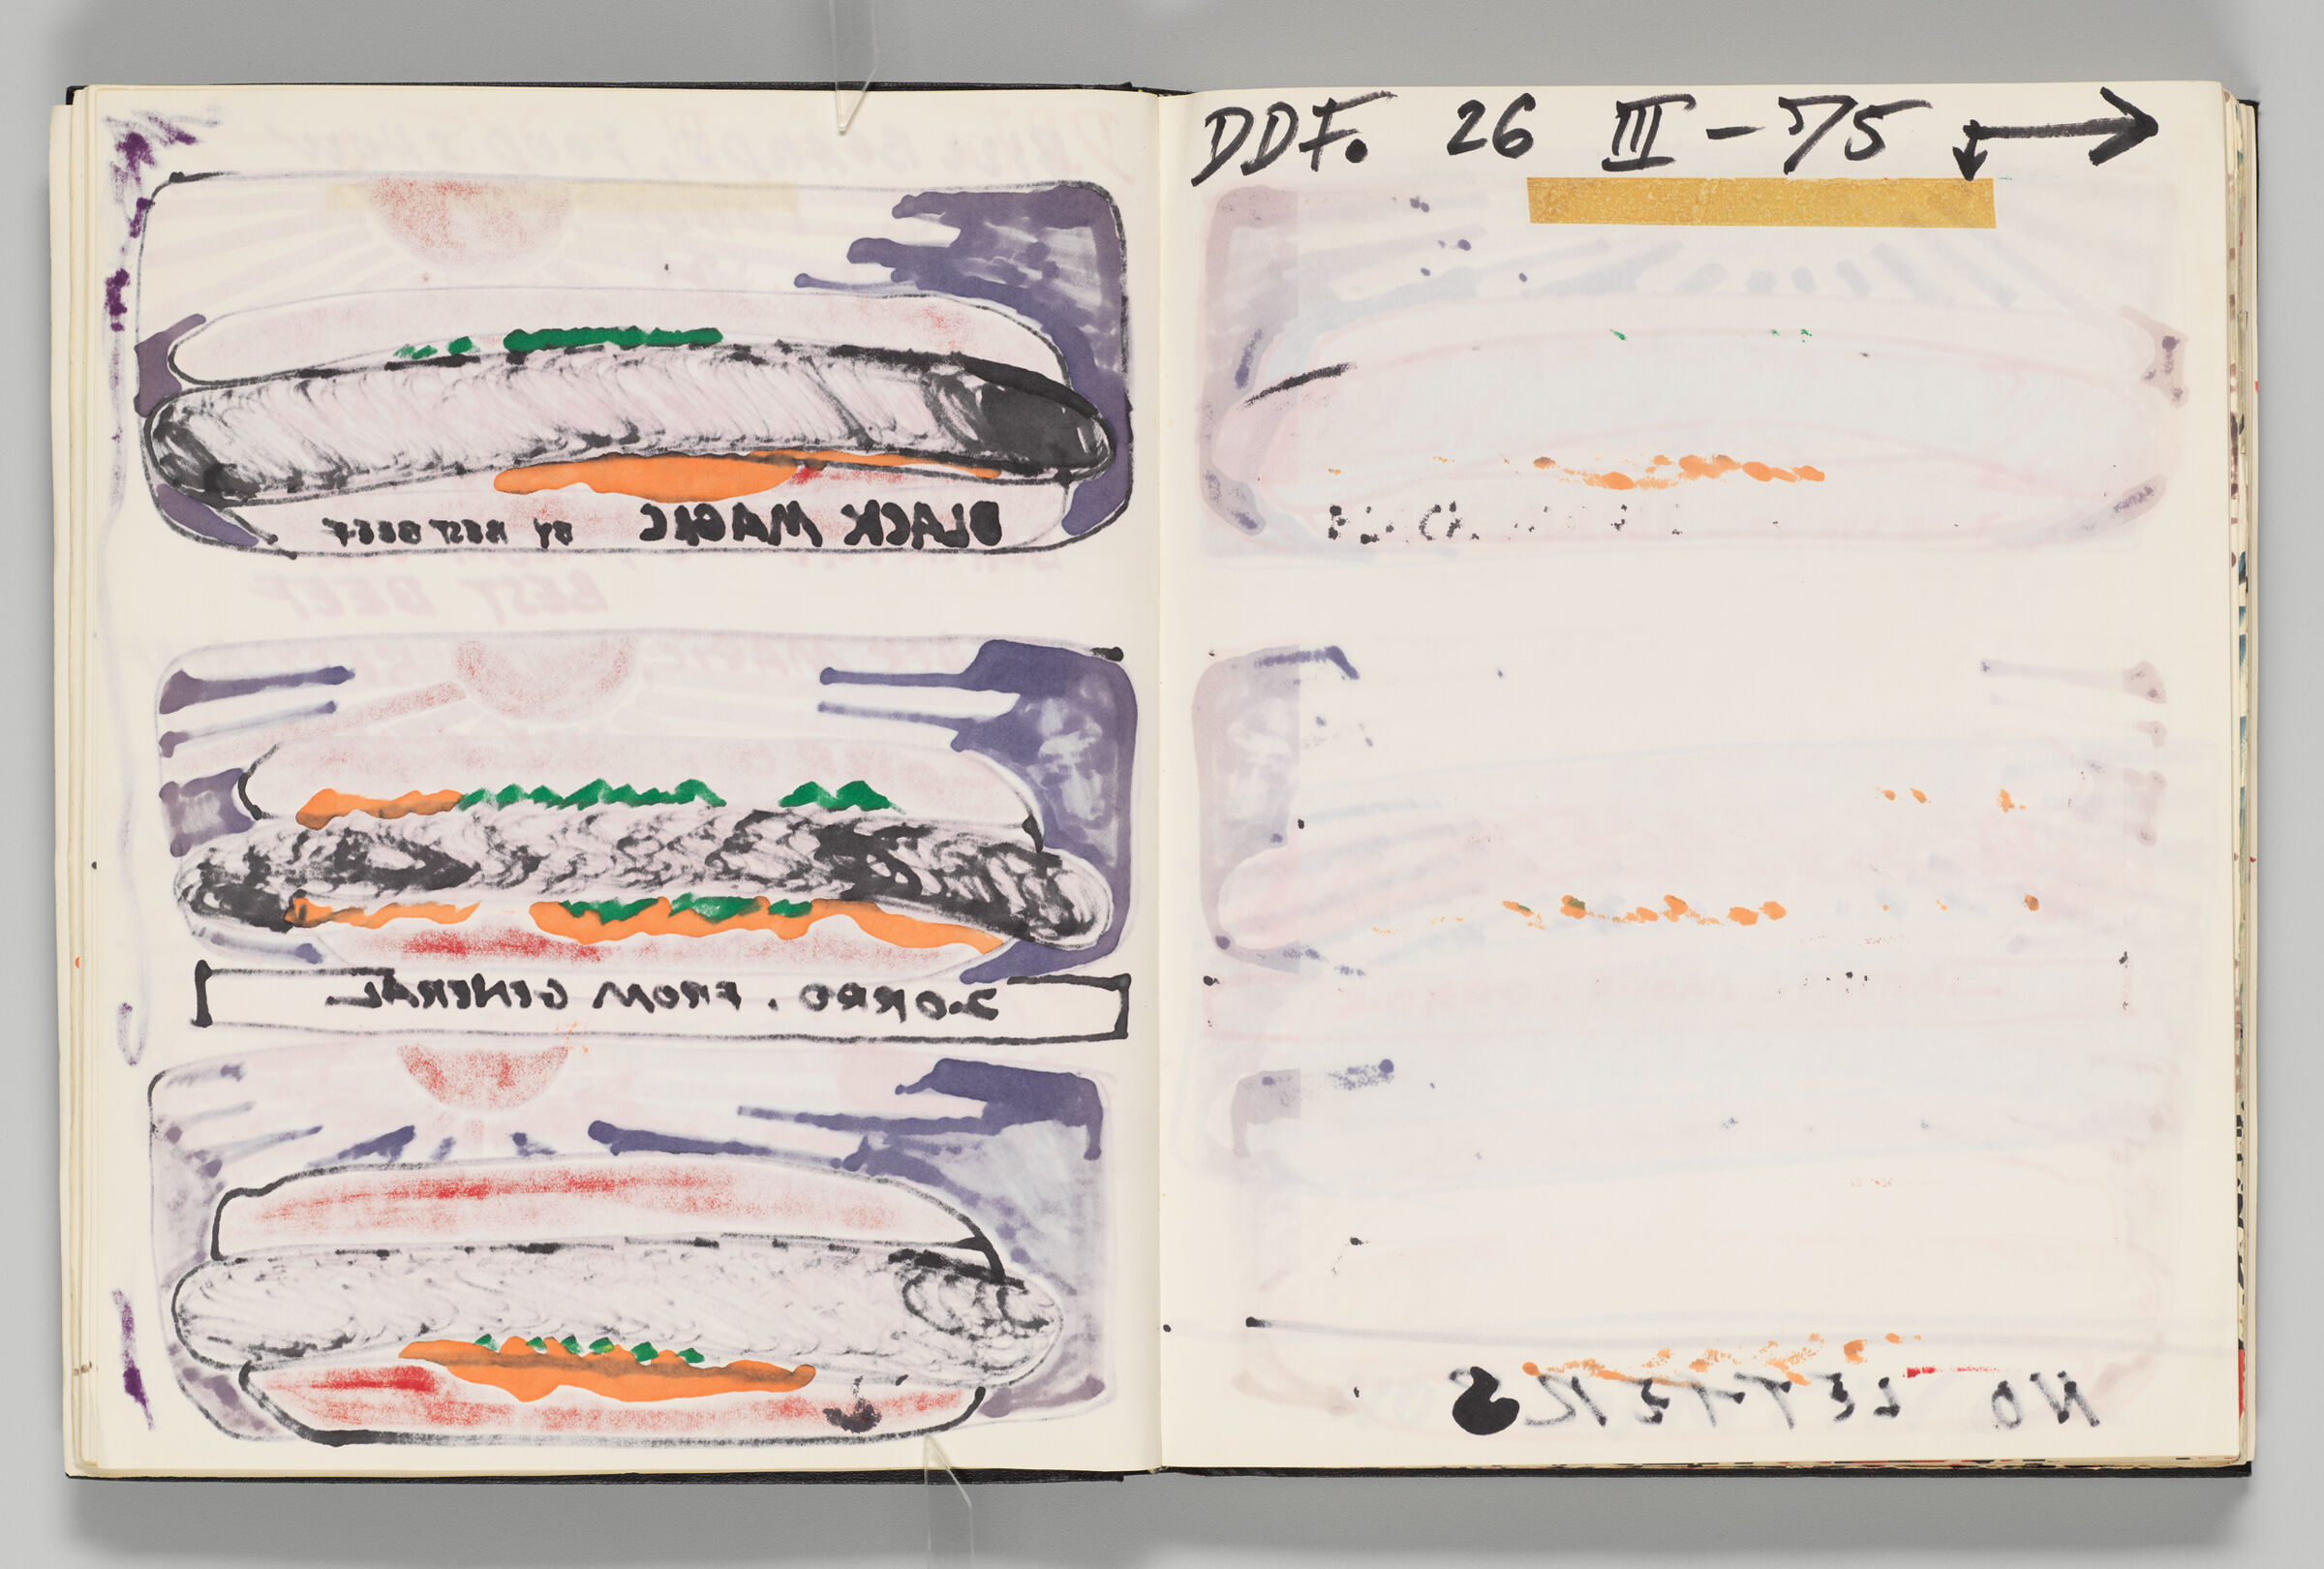 Untitled (Bleed-Through Of Previous Page, Left Page); Untitled (Note With Adhered Sheet [Now Detached] And Color Transfer, Right Page)